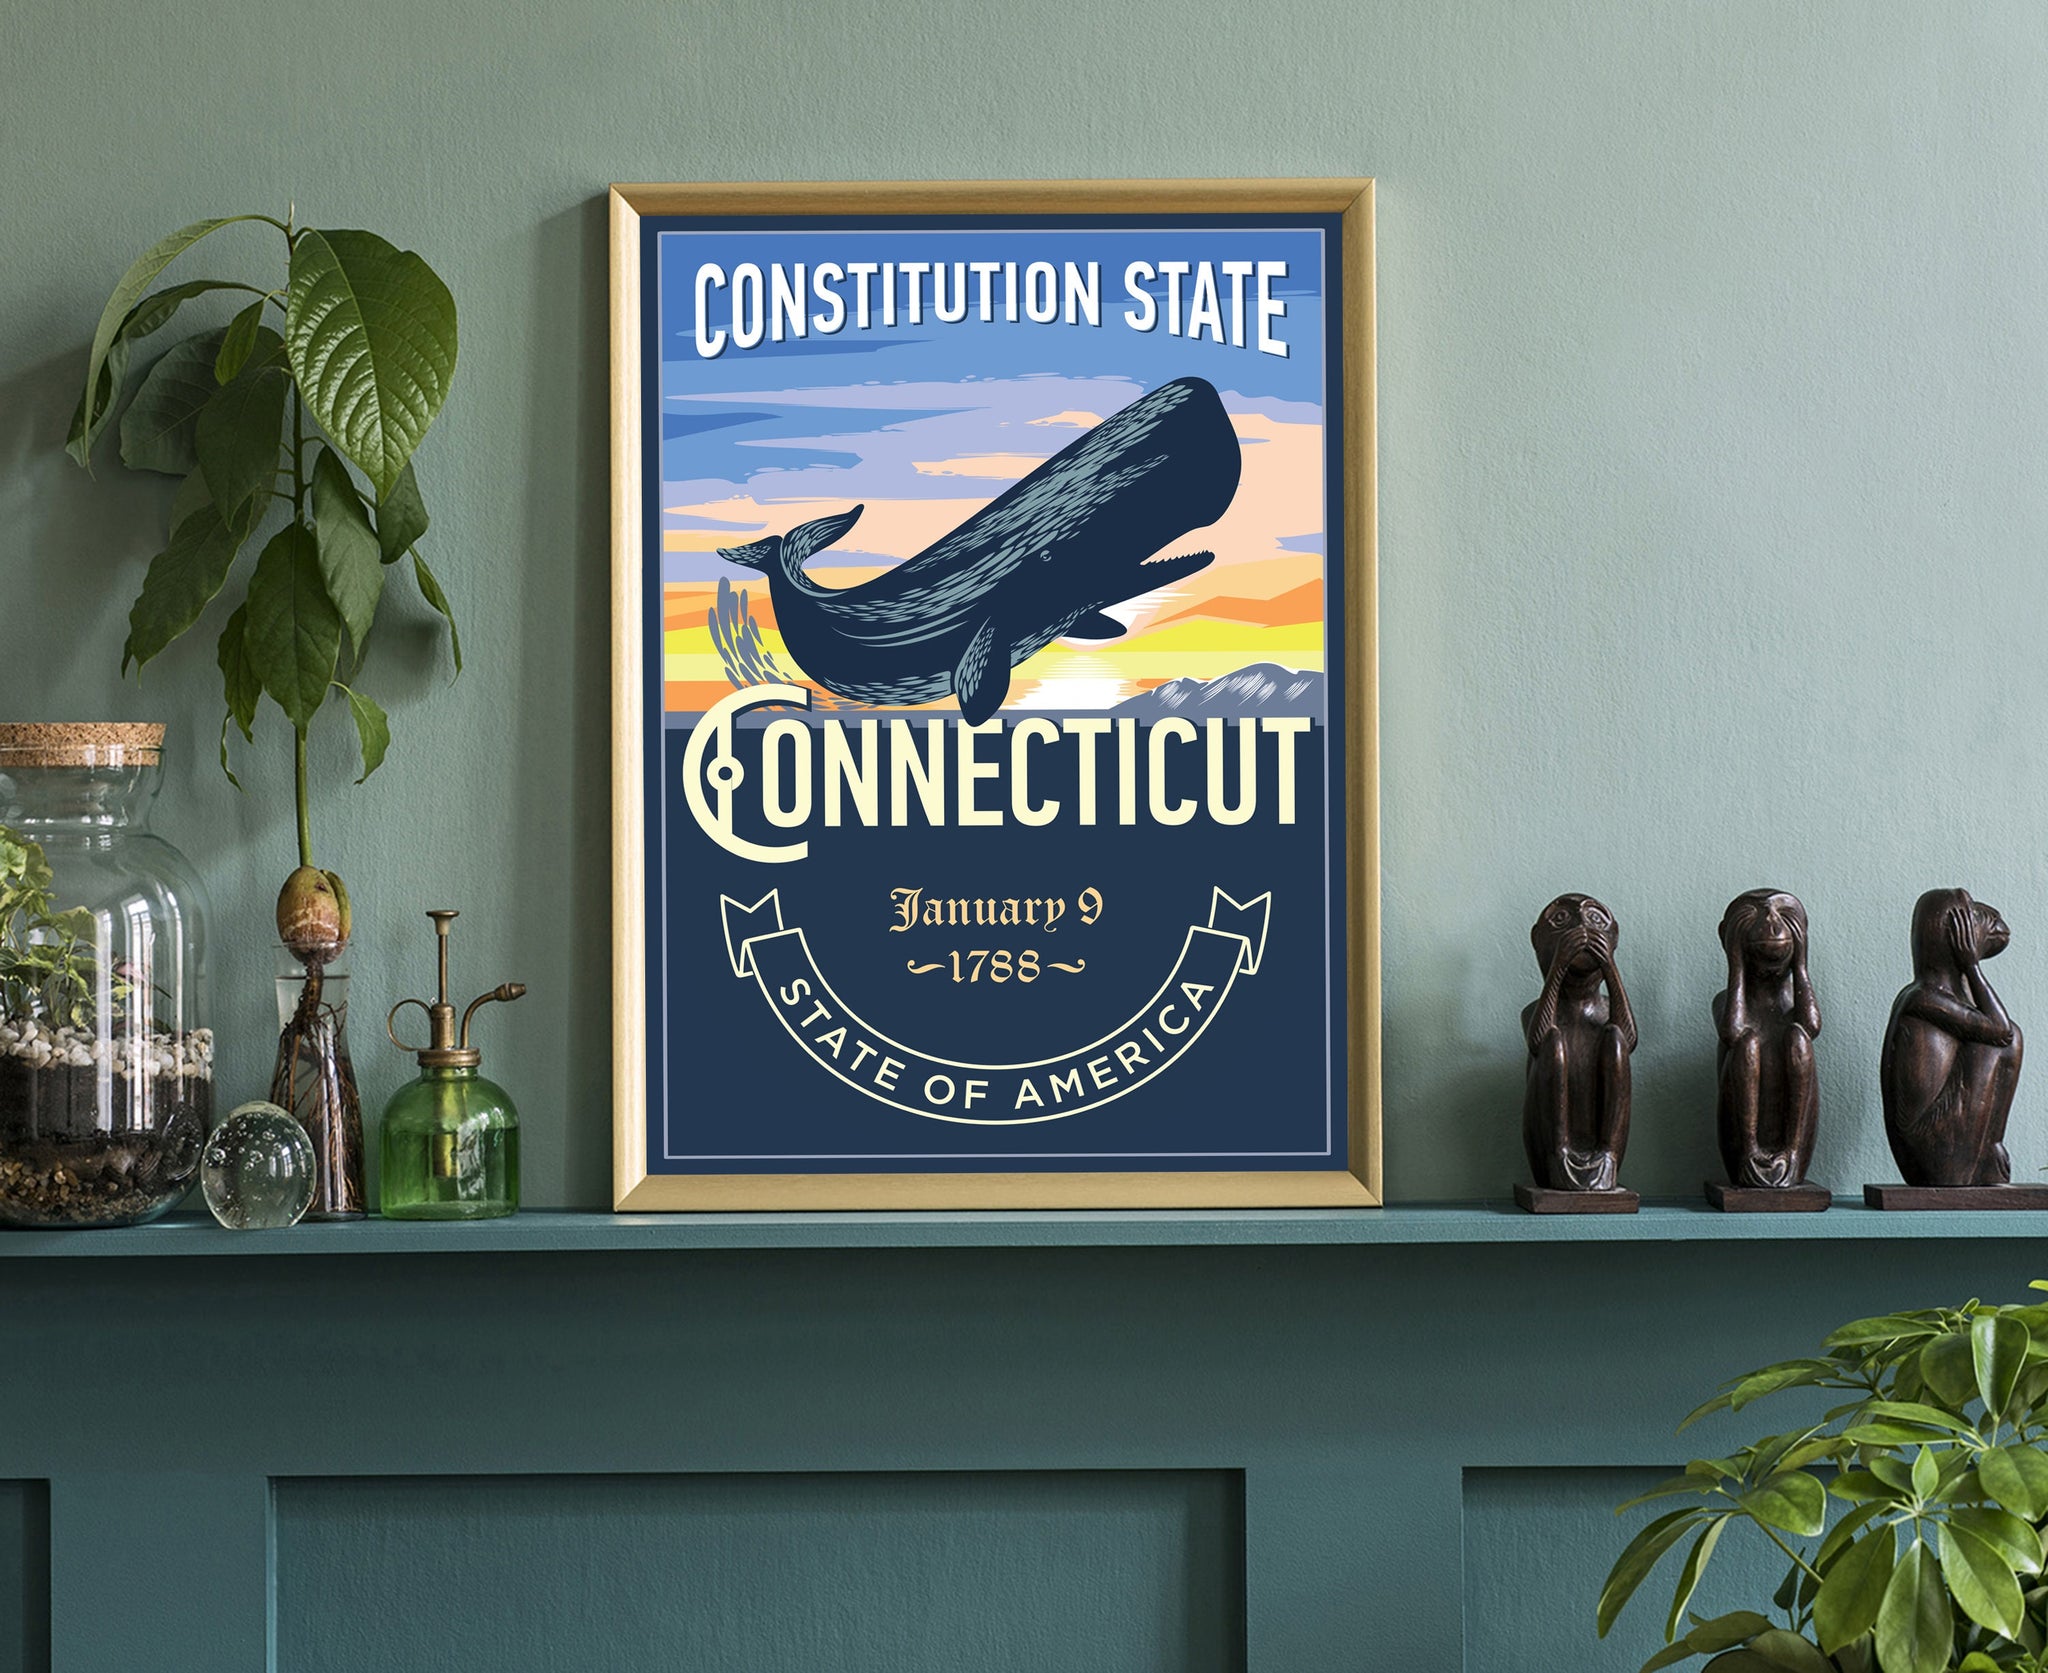 United States Connecticut State Poster Print, Connecticut State Emblem Poster, Retro Travel State Poster, Office Wall Art, Home Wall Decor